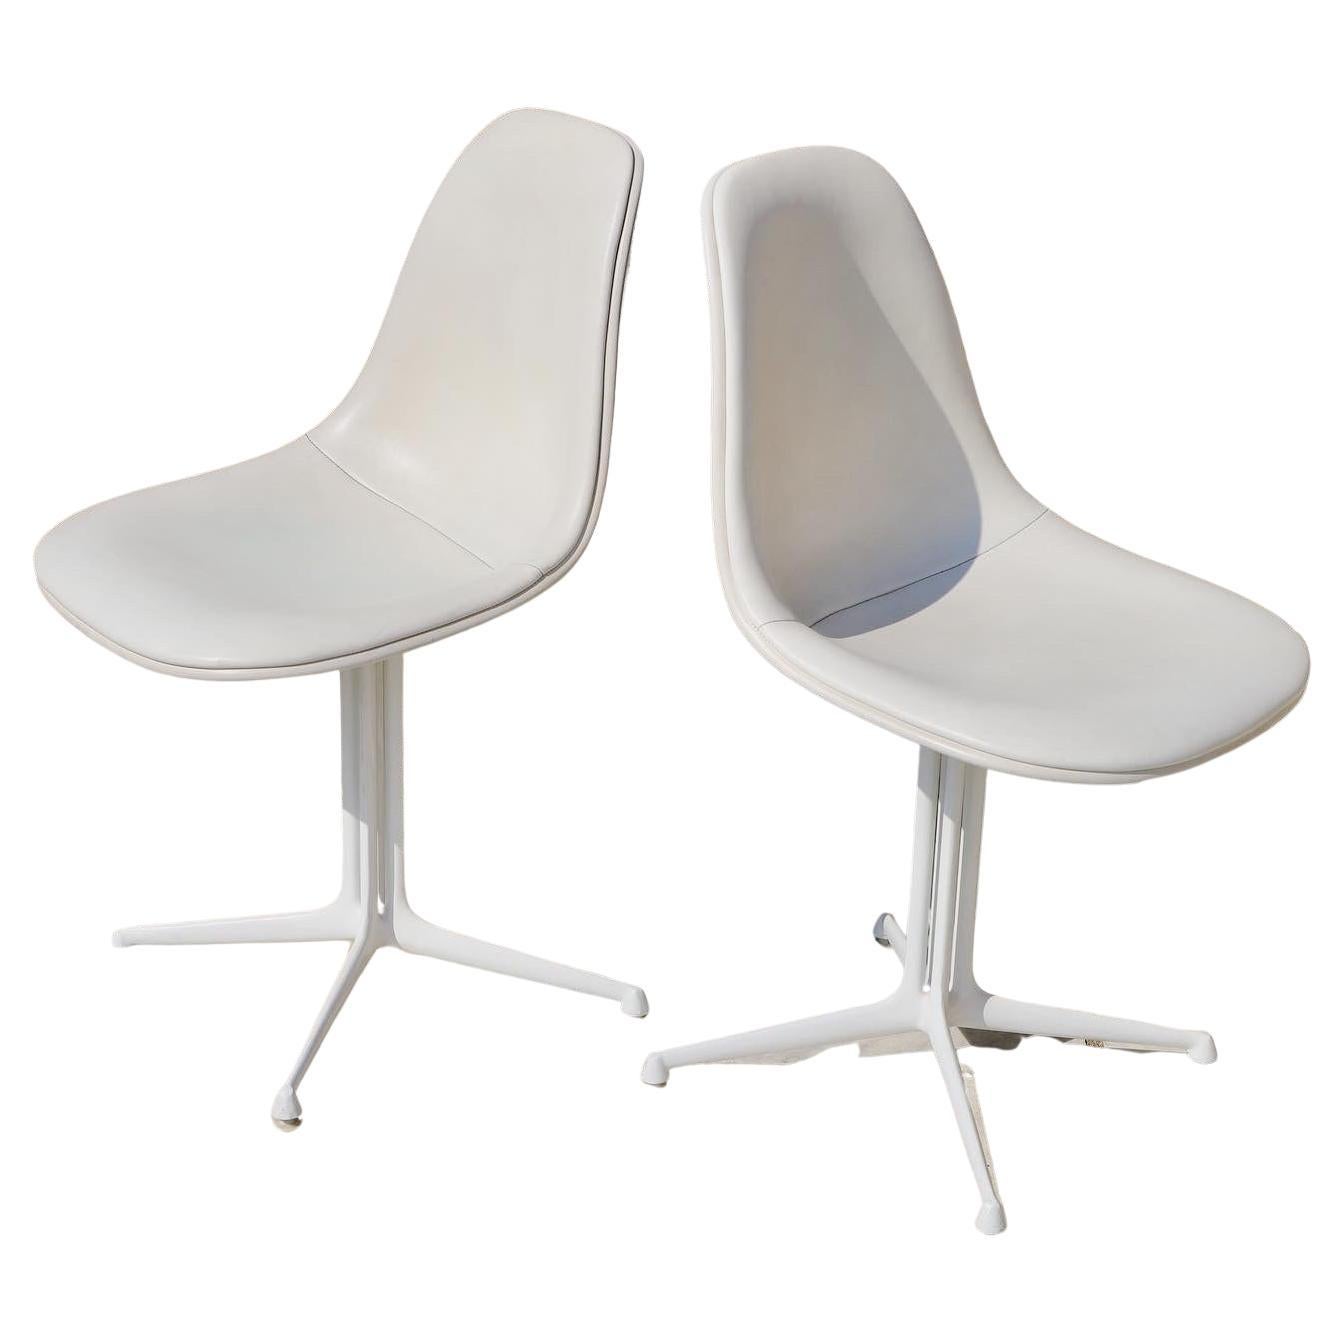 Set of 2 Chairs "La Fonda" Charles & Ray Eames / Herman Miller, 1970 For Sale